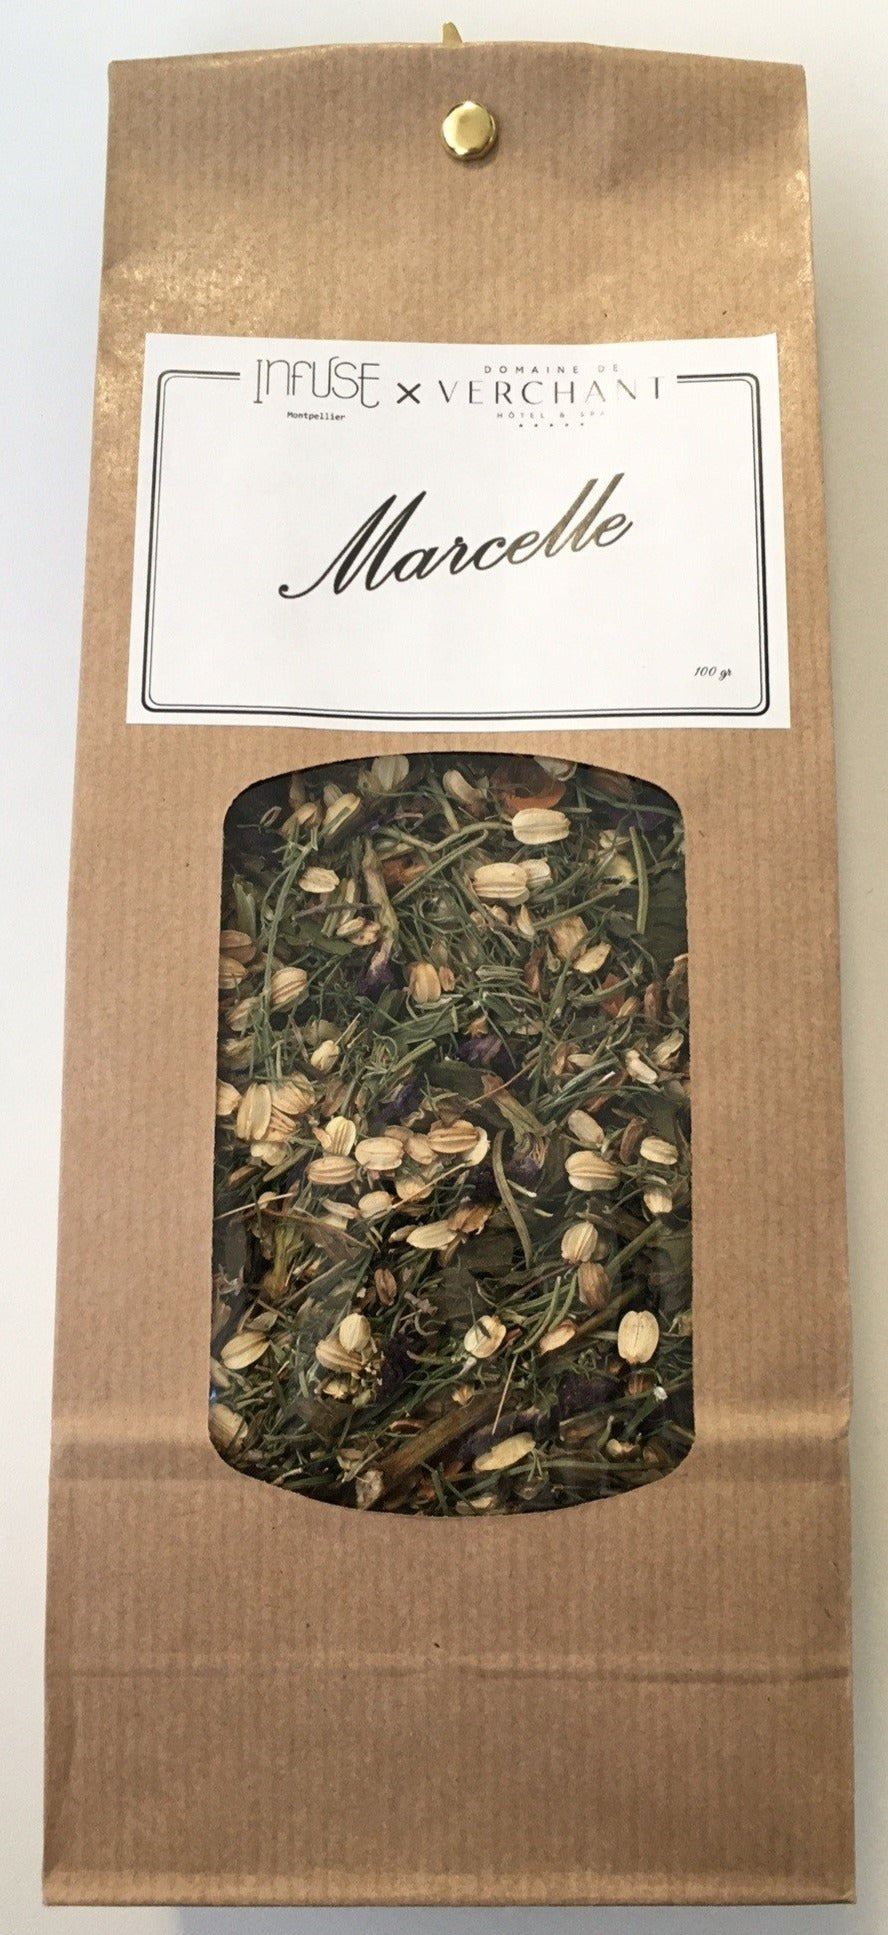 Infusion "Infuse" Marcelle